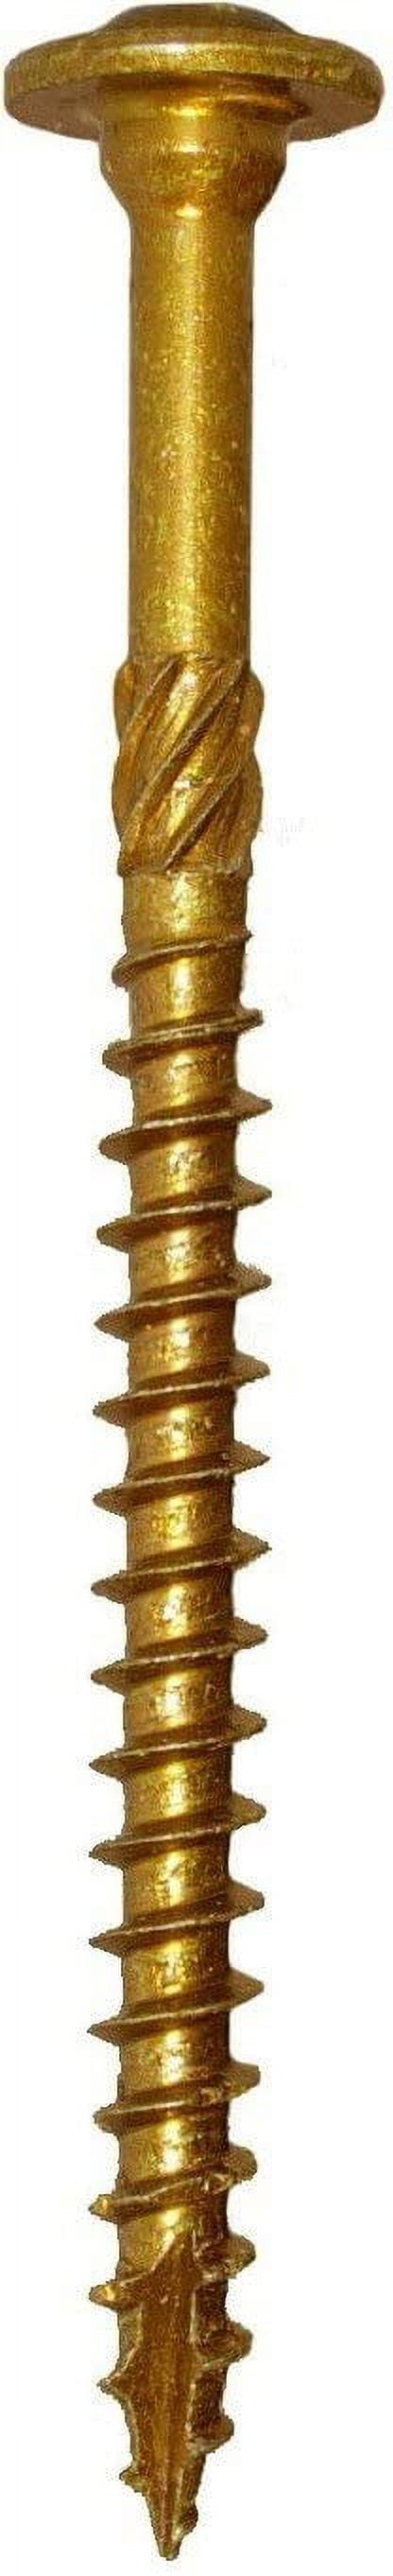 Picture of GRK Fasteners 5913256 0.31 x 3.12 in. Star Self Tapping Zinc Construction Screws, Yellow